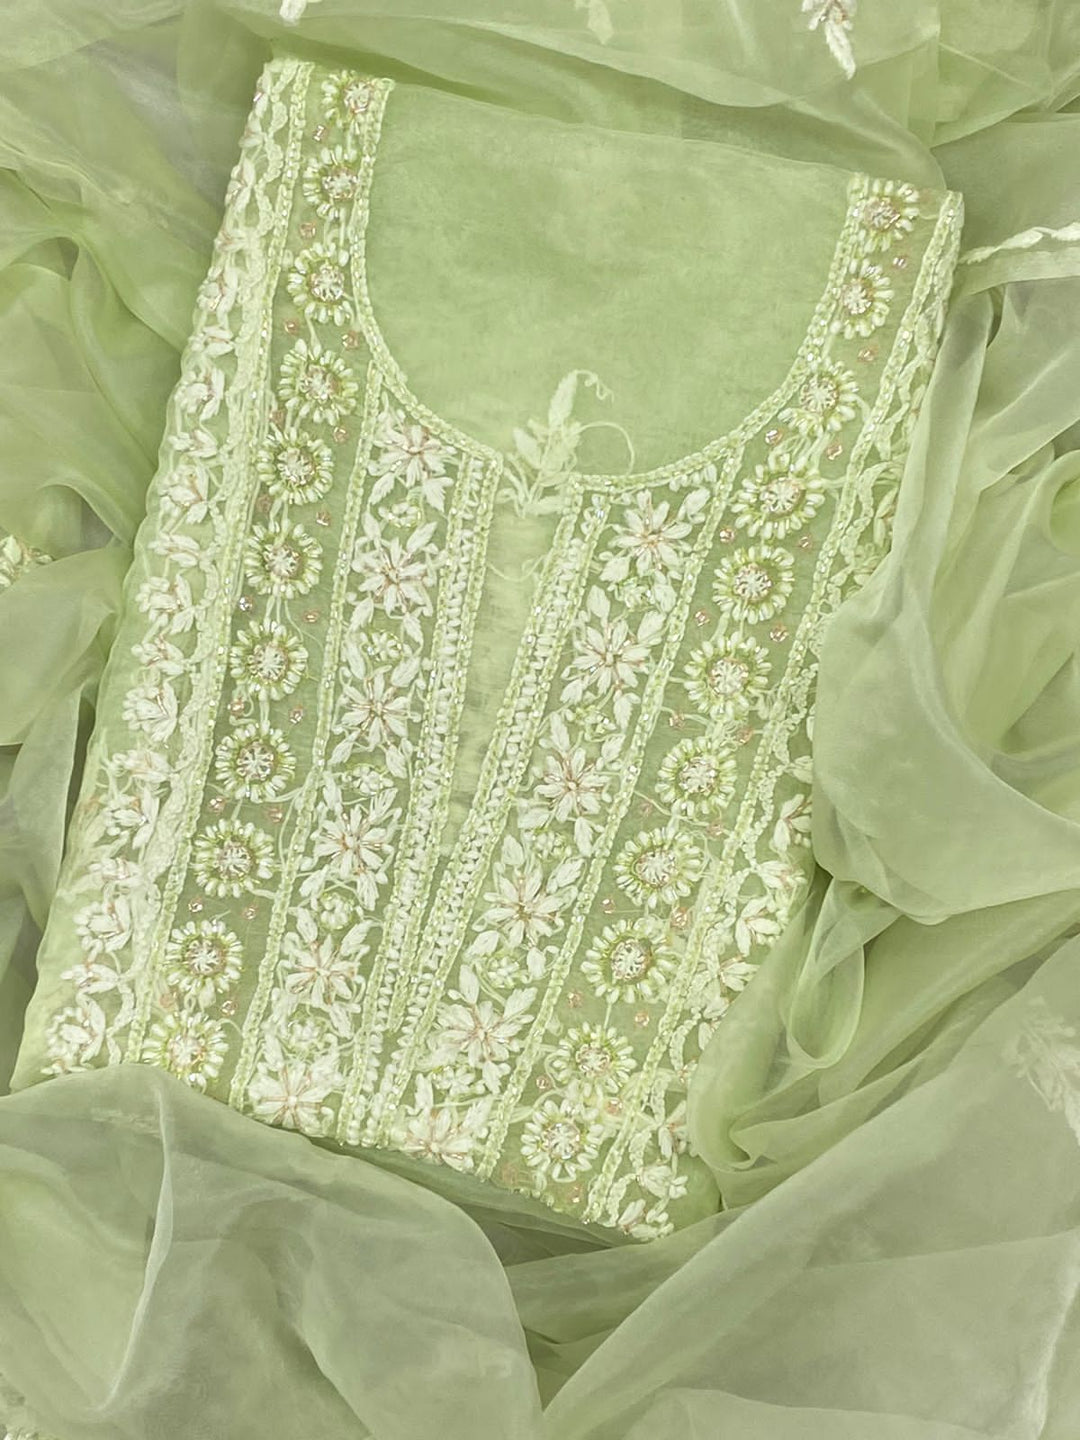 Pure Organza Chikankari Hand Embroidery With Pearl Cutdana Work Unstitched Suit With Dupatta.